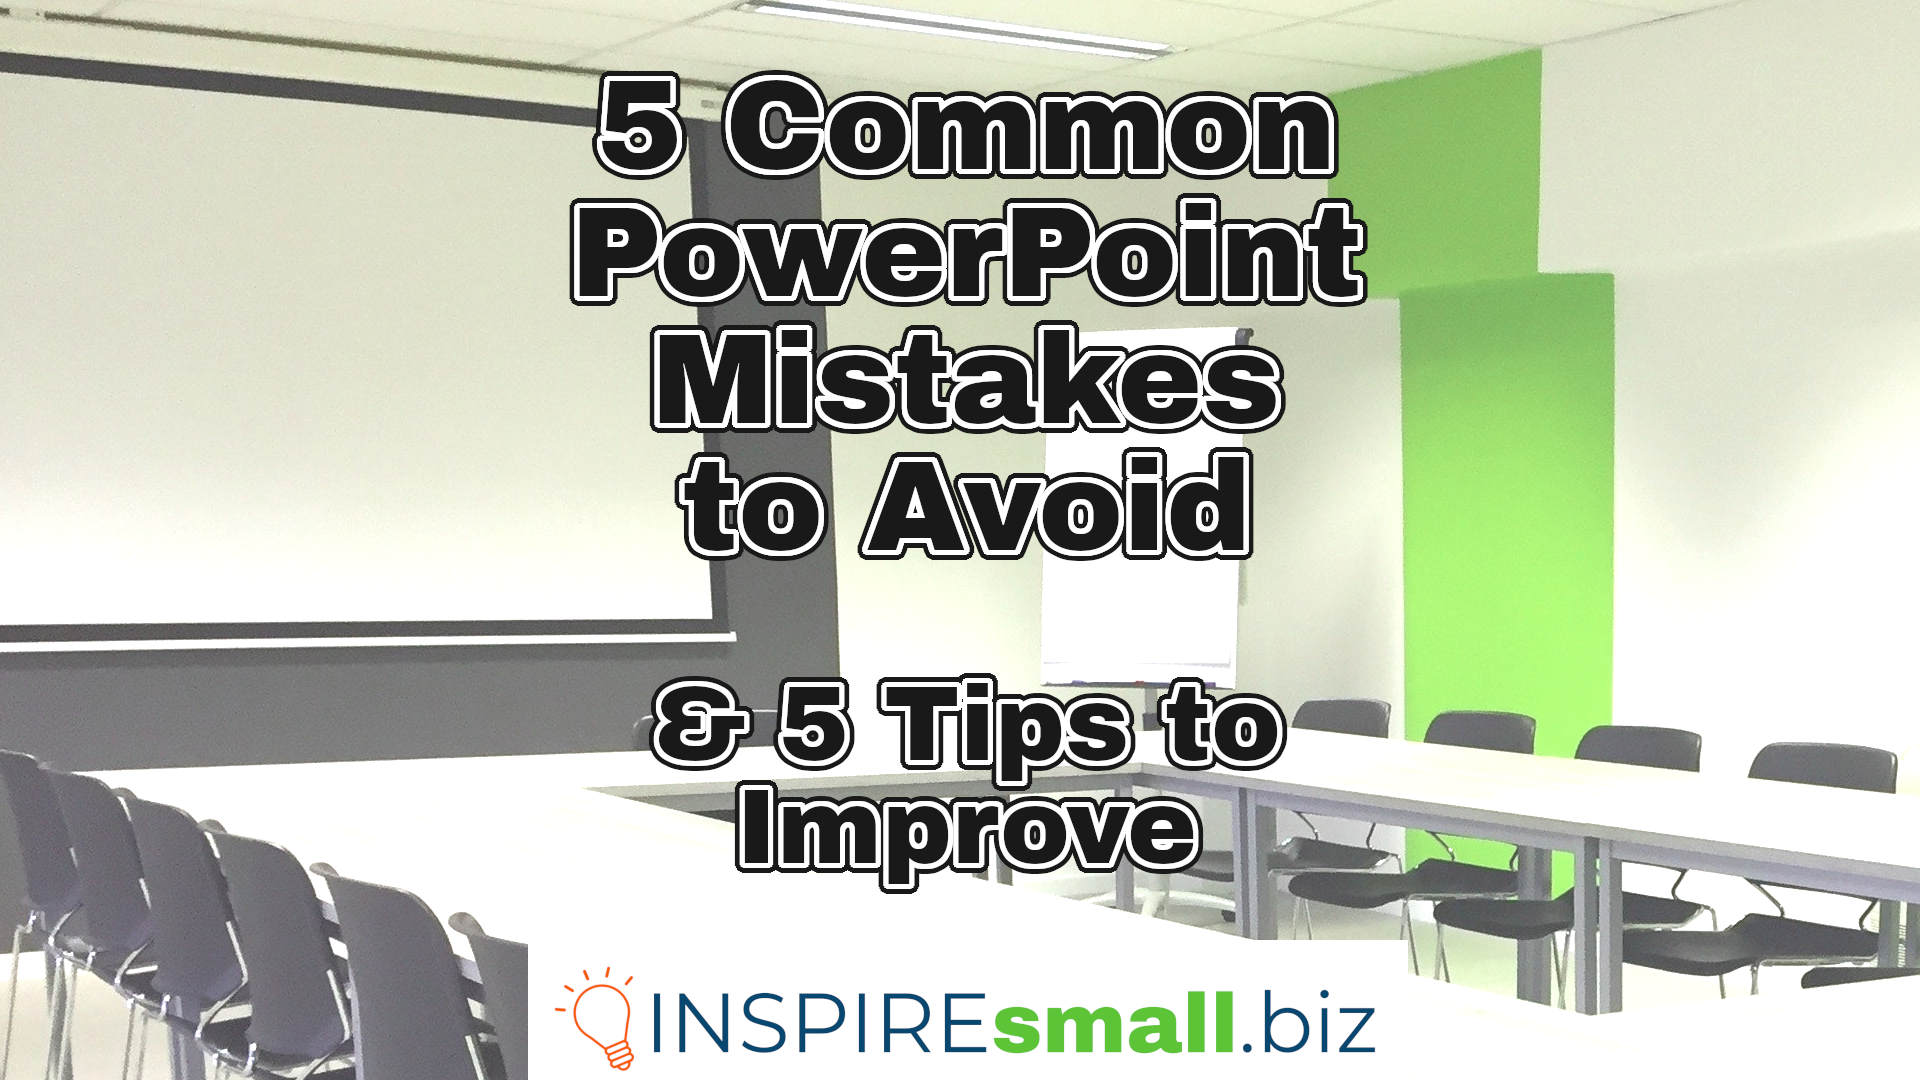 5 Common PowerPoint Mistakes to Avoid & 5 Tips to Improve